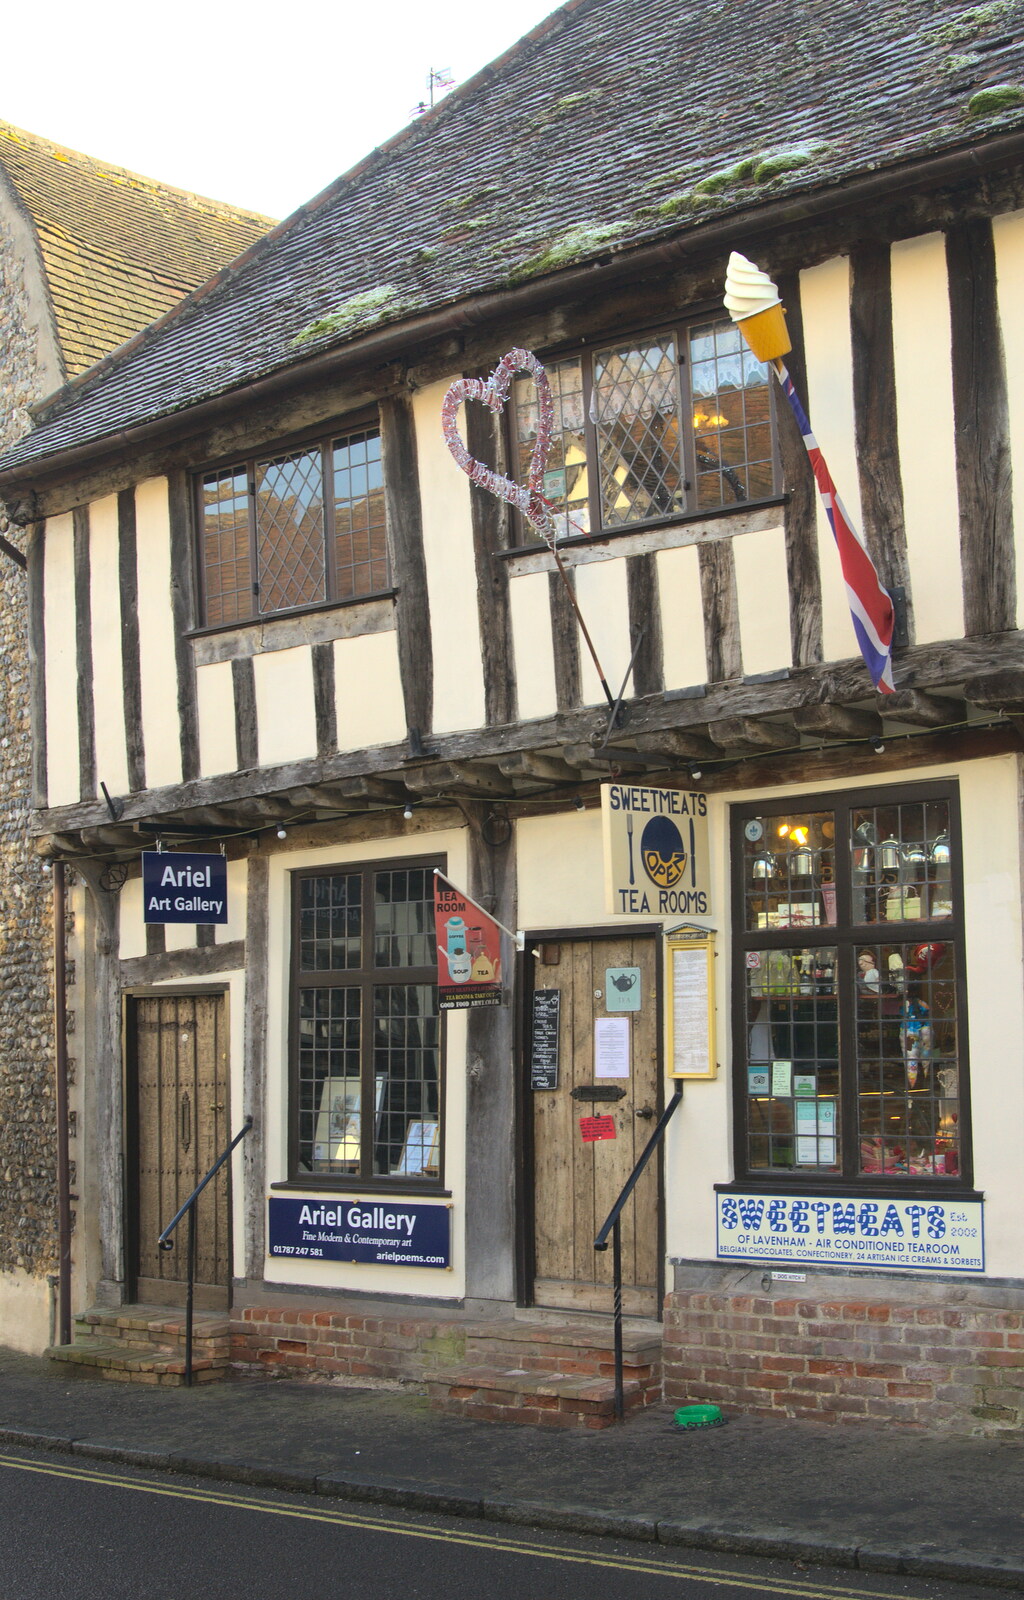 A Lavenham ice-cream shop from A Day in Lavenham, Suffolk - 22nd January 2017